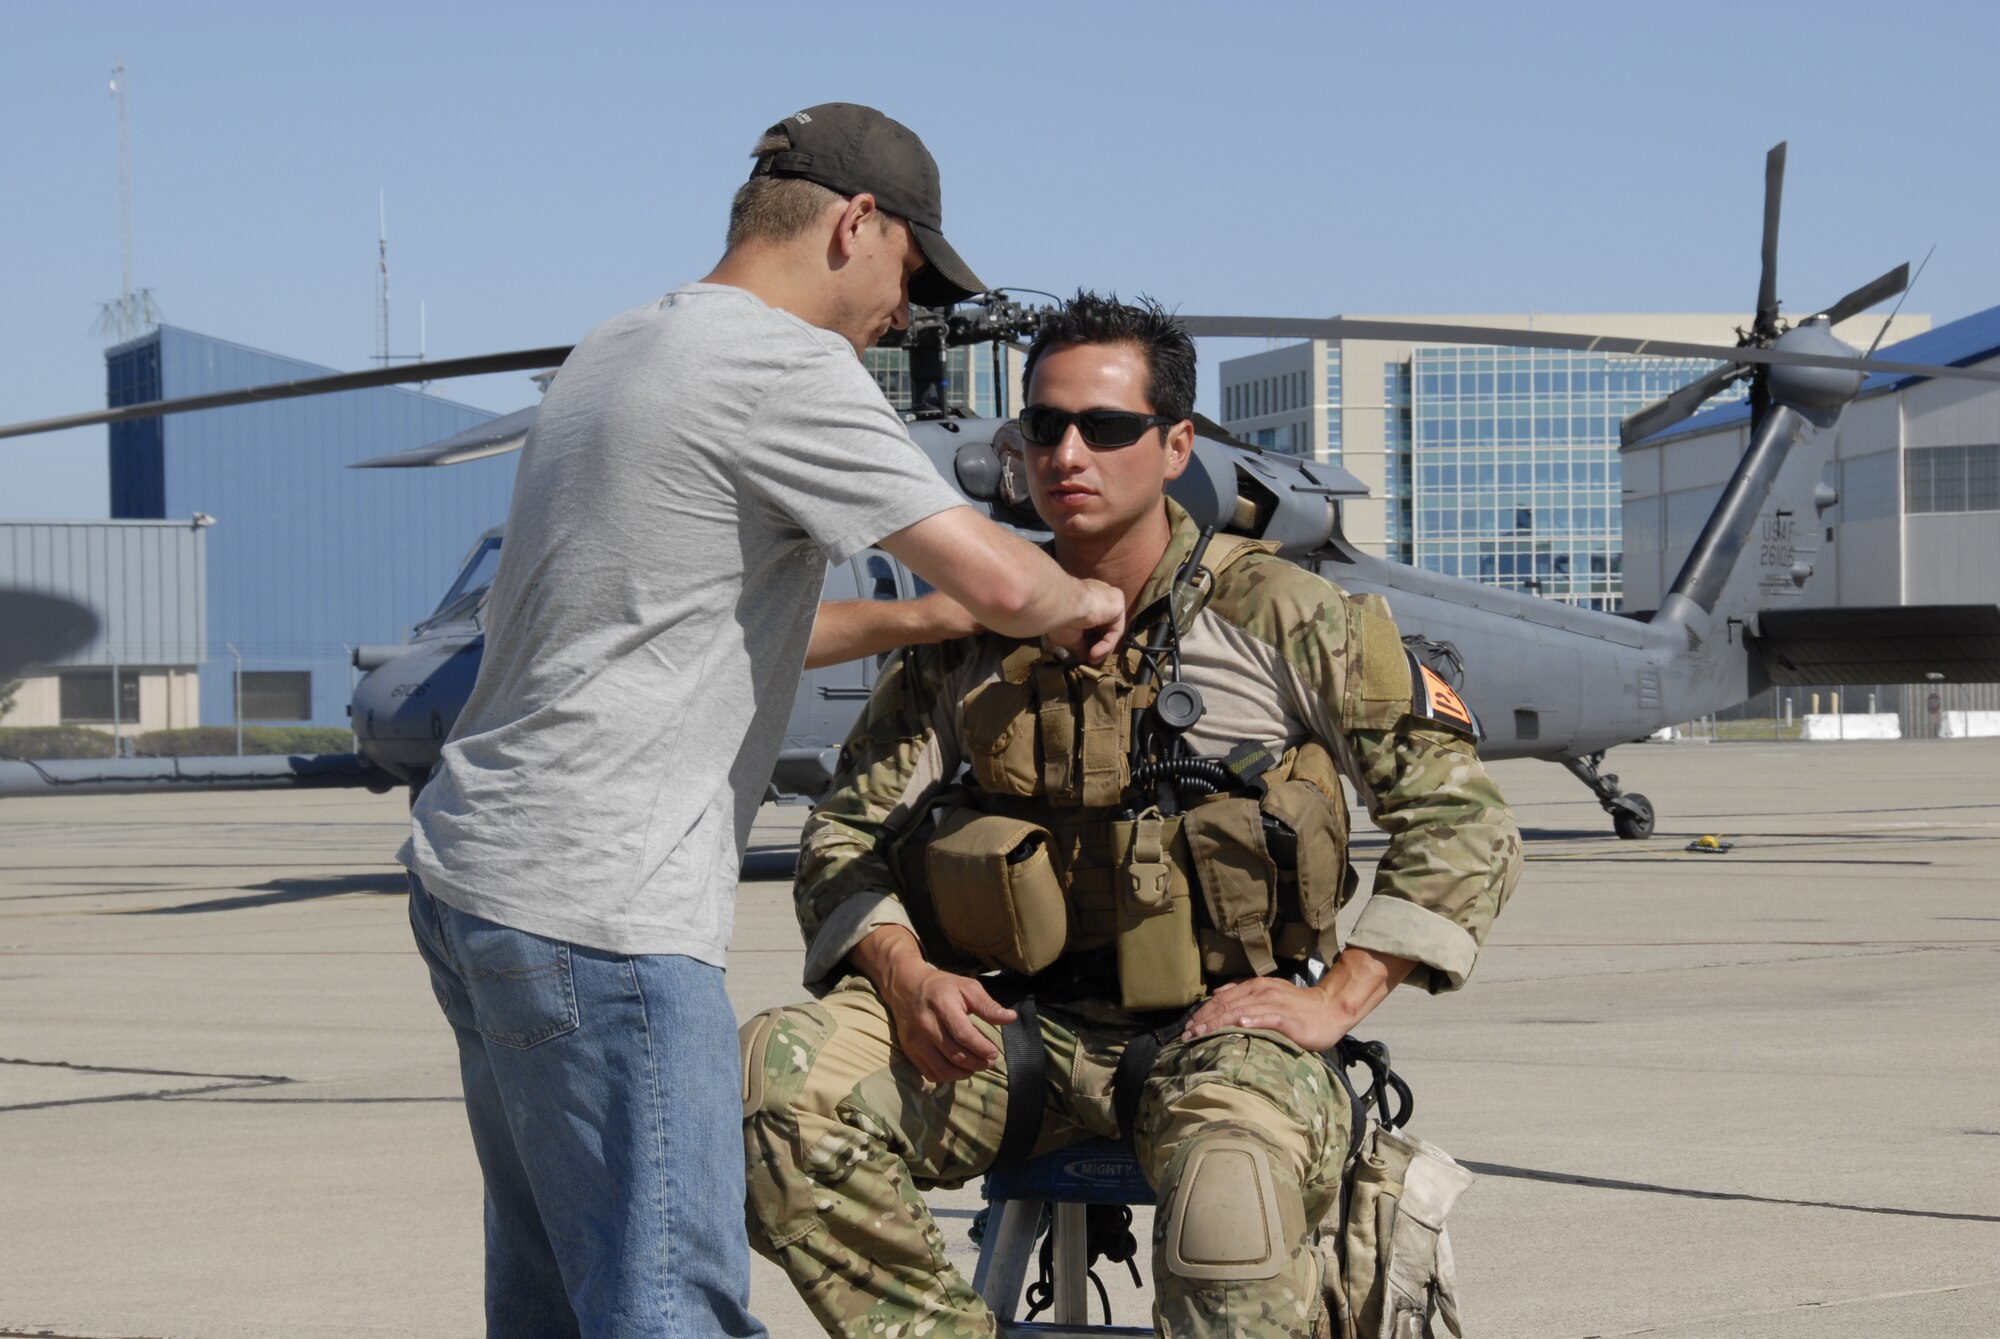 Tech. Sgt. Mike Davis, photographer for the Air National Guard Advertising and Marketing Creative Branch, puts a lapel microphone on Tech. Sgt. Luigge Romanillo, a pararescueman from the 131st Rescue Squadron, in preparation for an interview at Moffett Federal Airfield, Calif., with the Air National Guard Advertising and Marketing team during a video shoot for the redesign of GoANG.com, Aug. 5, 2009.  (Air National Guard photo by Tech. Sgt. Ray Aquino)